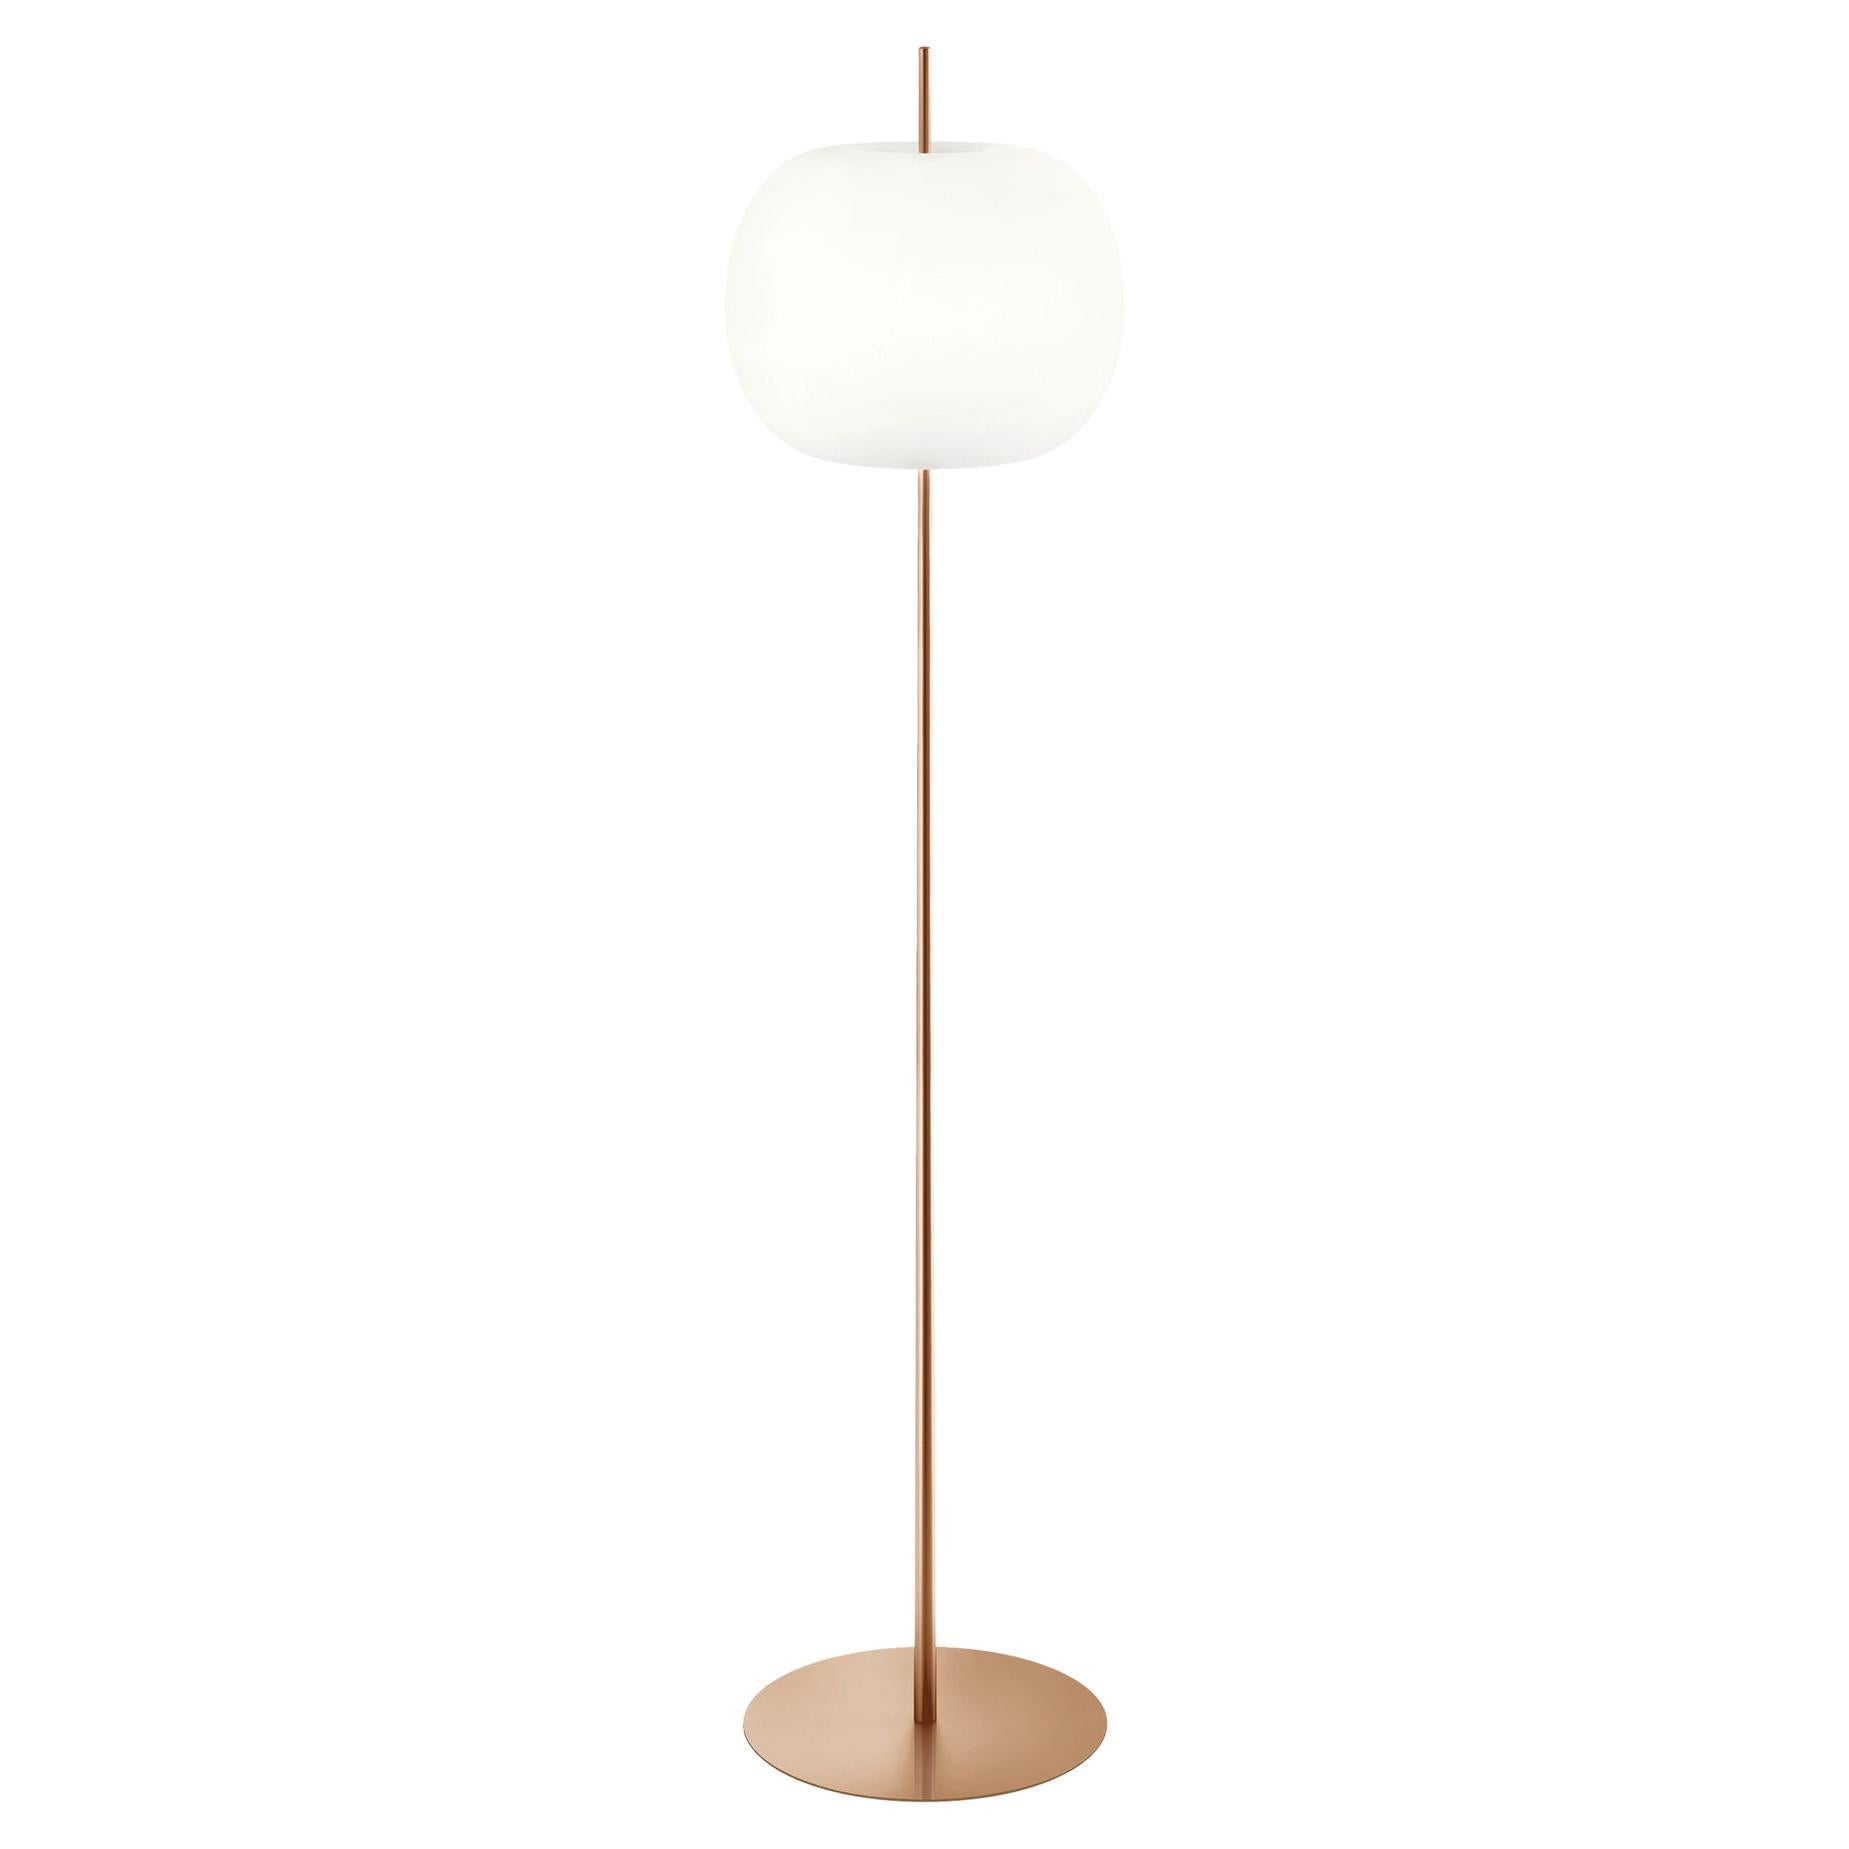 'Kushi XL' Opaline Glass and Copper Floor Lamp for Kdln